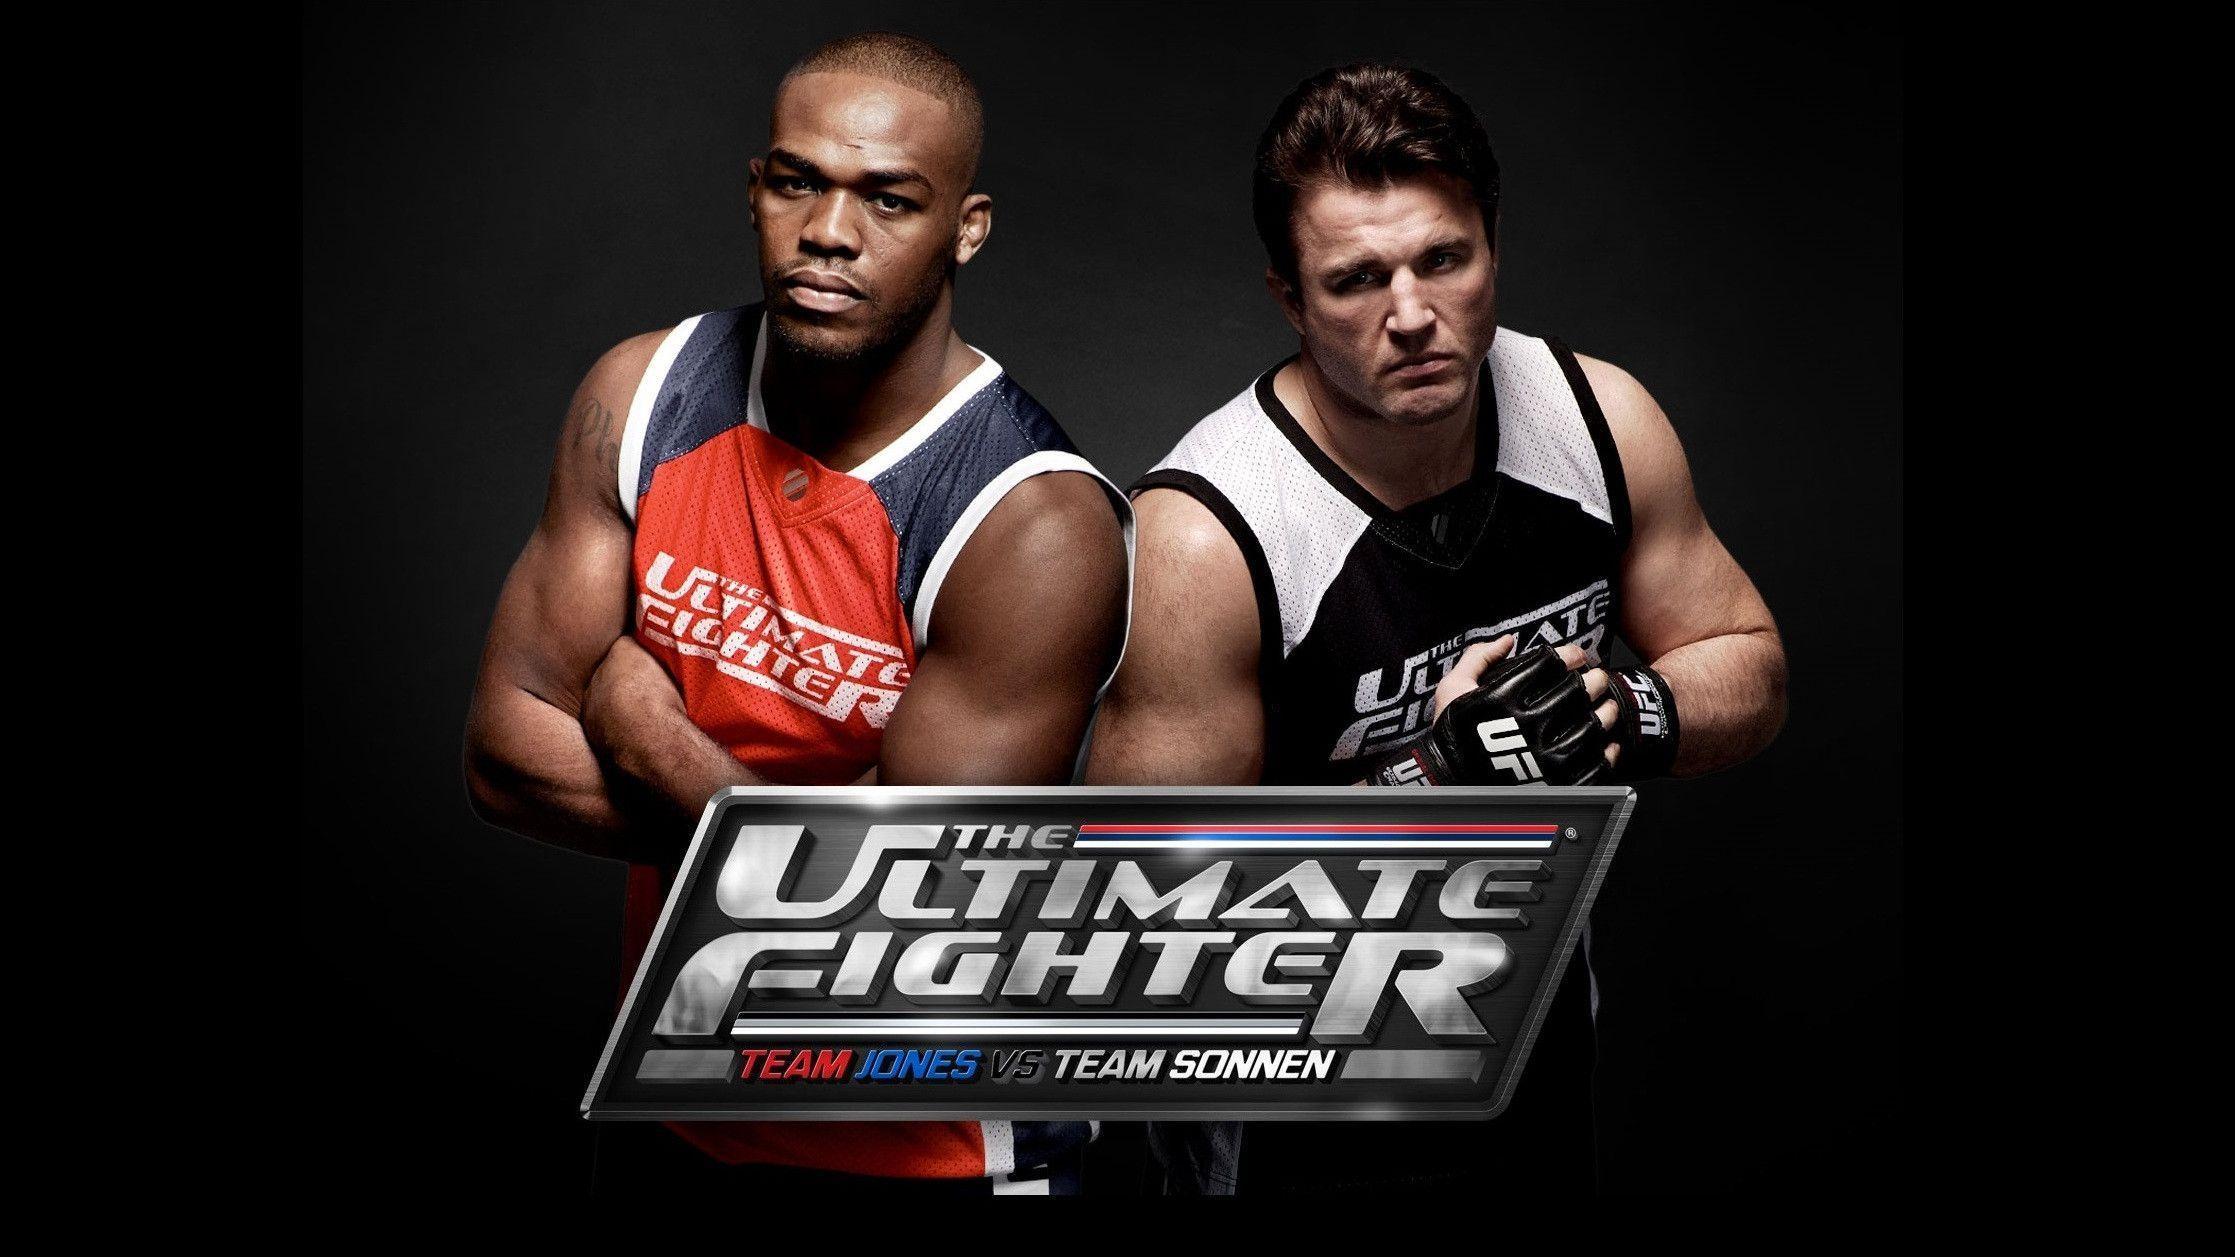 The Ultimate Fighter Ufc (id: 101763)